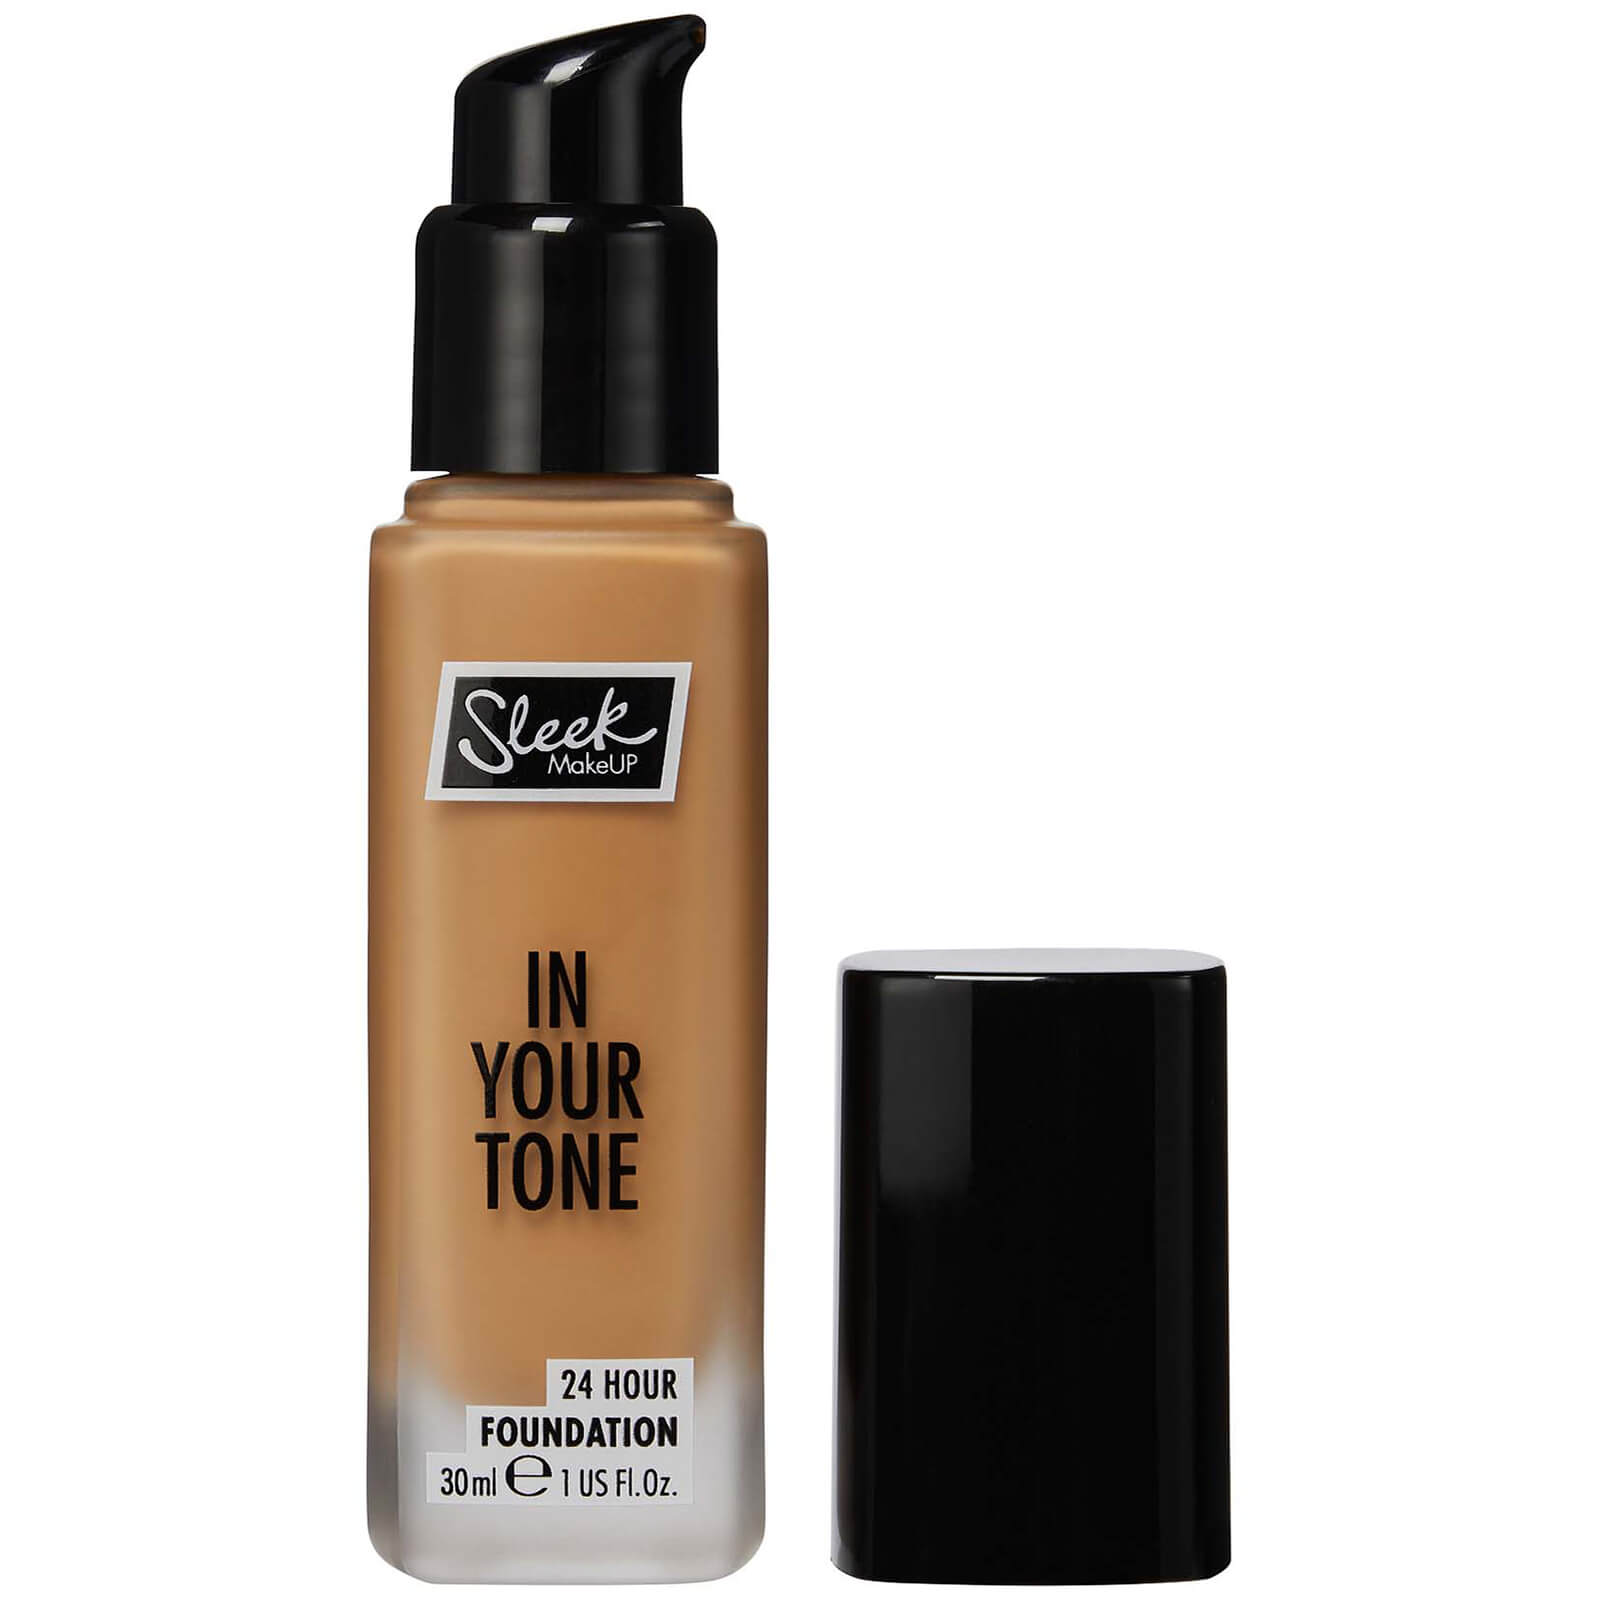 Sleek MakeUP in Your Tone 24 Hour Foundation 30ml (Various Shades) - 7W